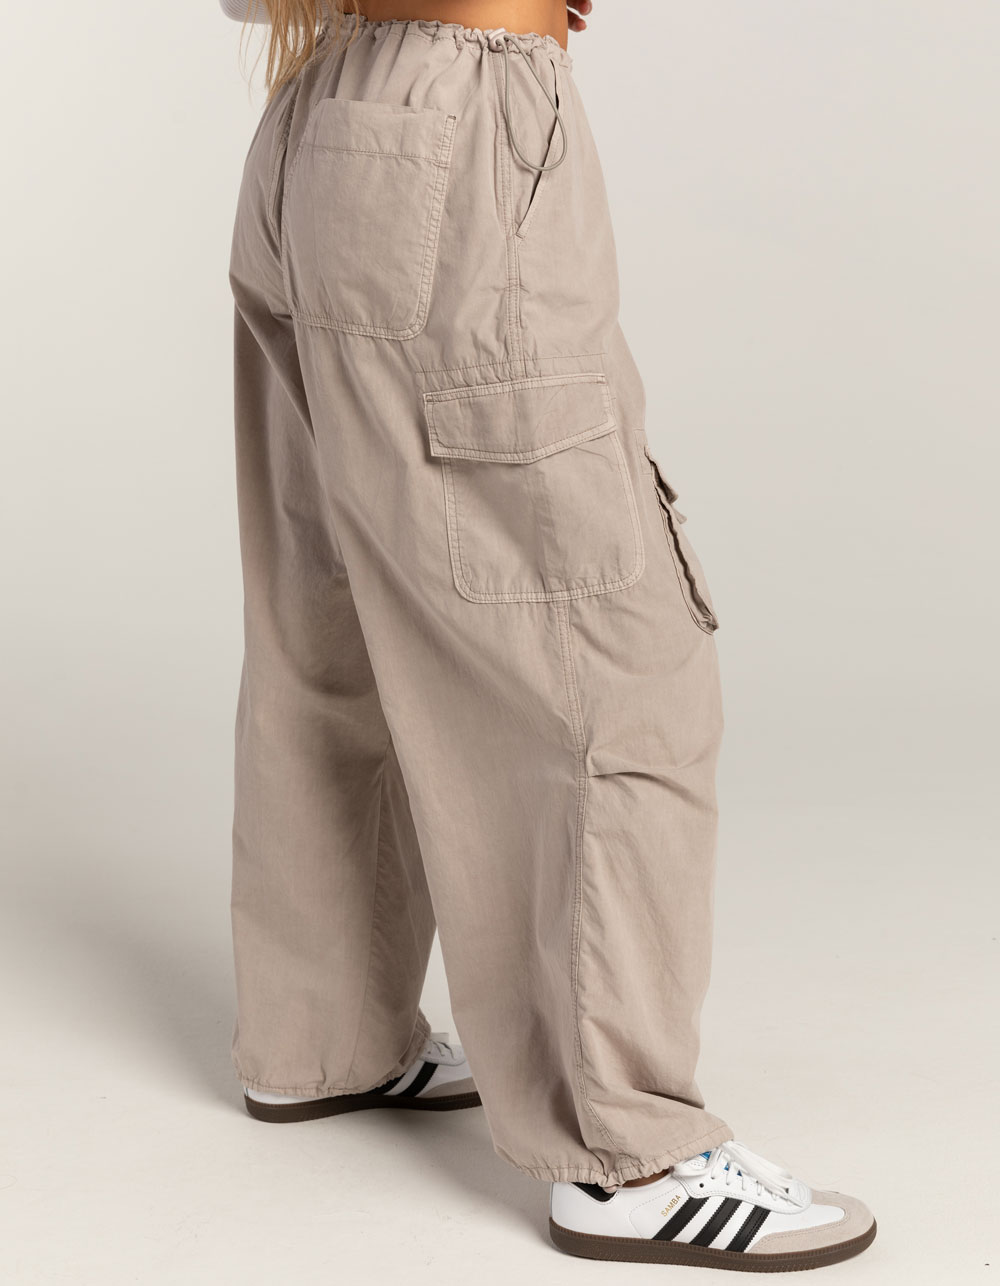 BDG Urban Outfitters Maxi Pocket Womens Tech Pants - STONE